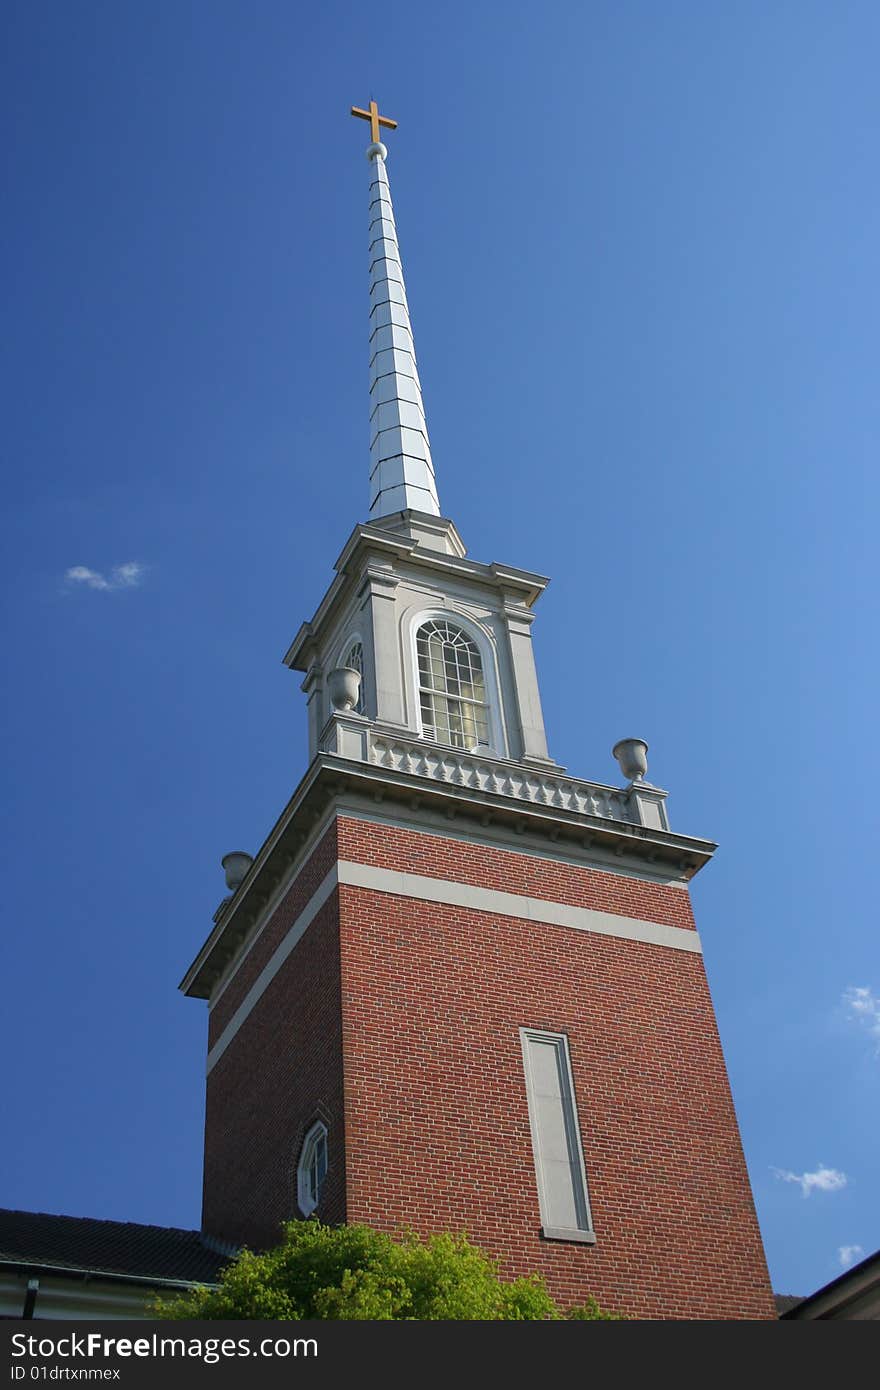 A traditional-style church steeple topped by a cross rises into a brilliant blue sky, with a few nice-day white clouds.

Focus is on the steeple & cross.
Includes copy space.
Please use respectfully.